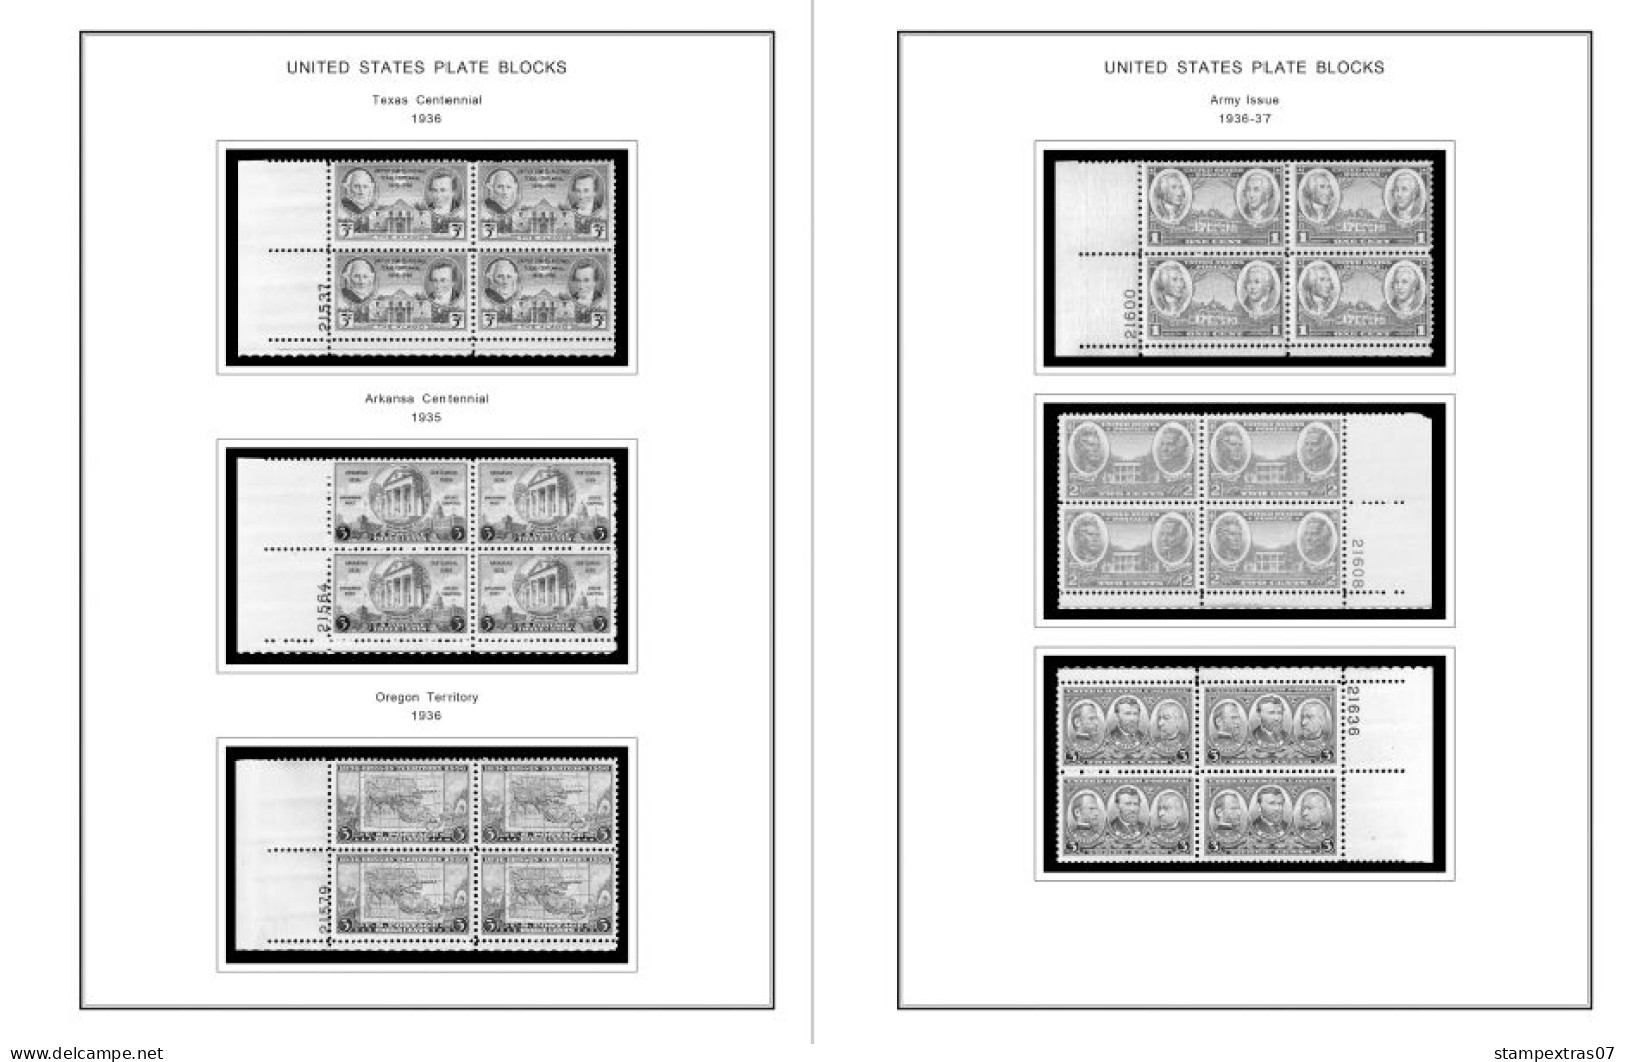 US 1930-1939 PLATE BLOCKS STAMP ALBUM PAGES (47 b&w illustrated pages)